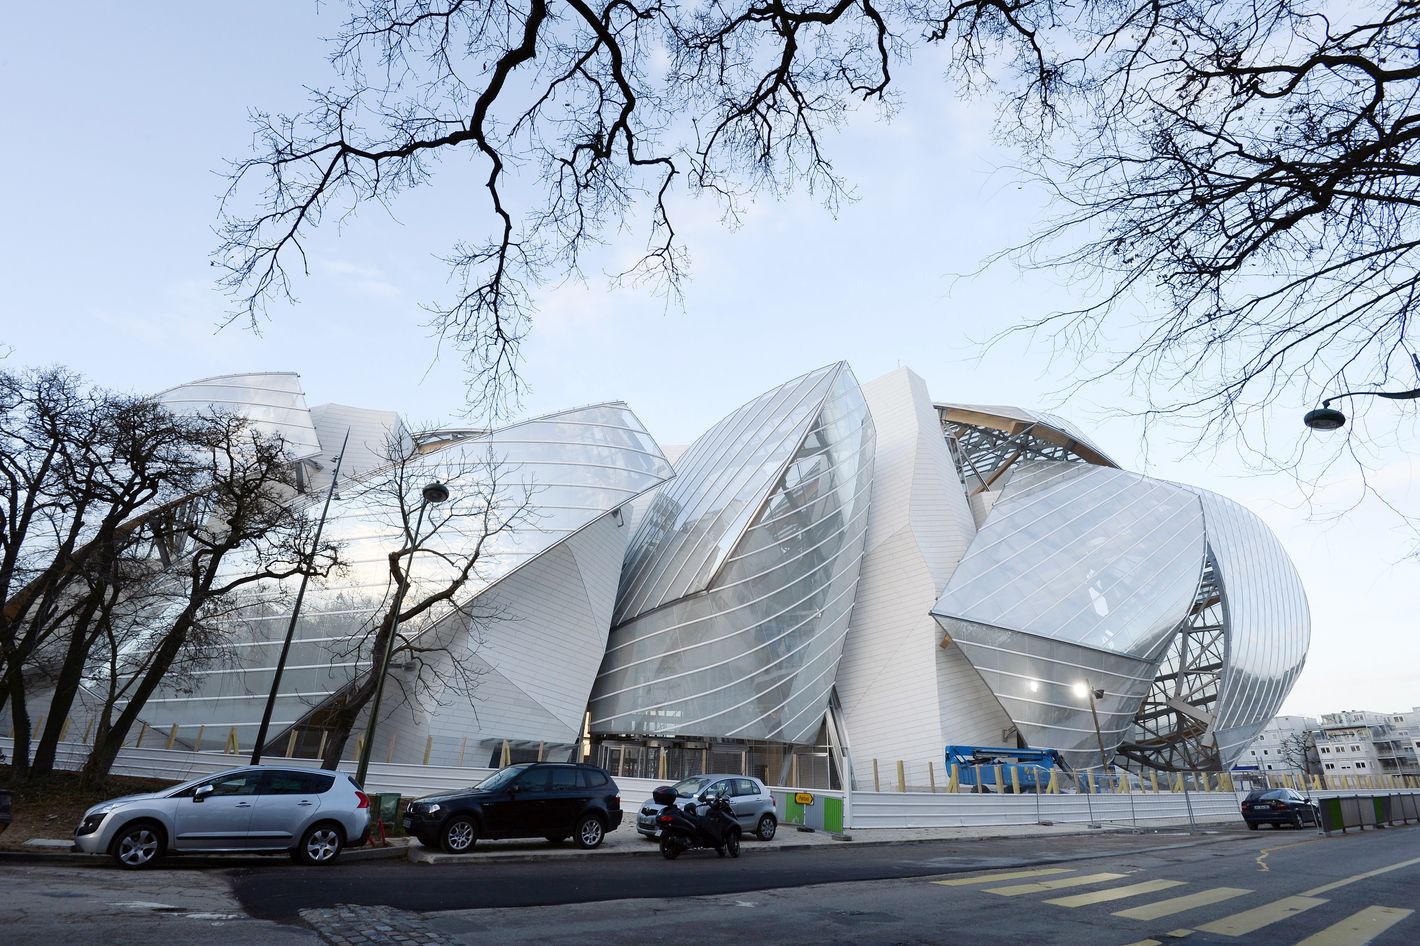 Frank Gehry's Fondation Louis Vuitton shows he doesn't know when to stop, Architecture